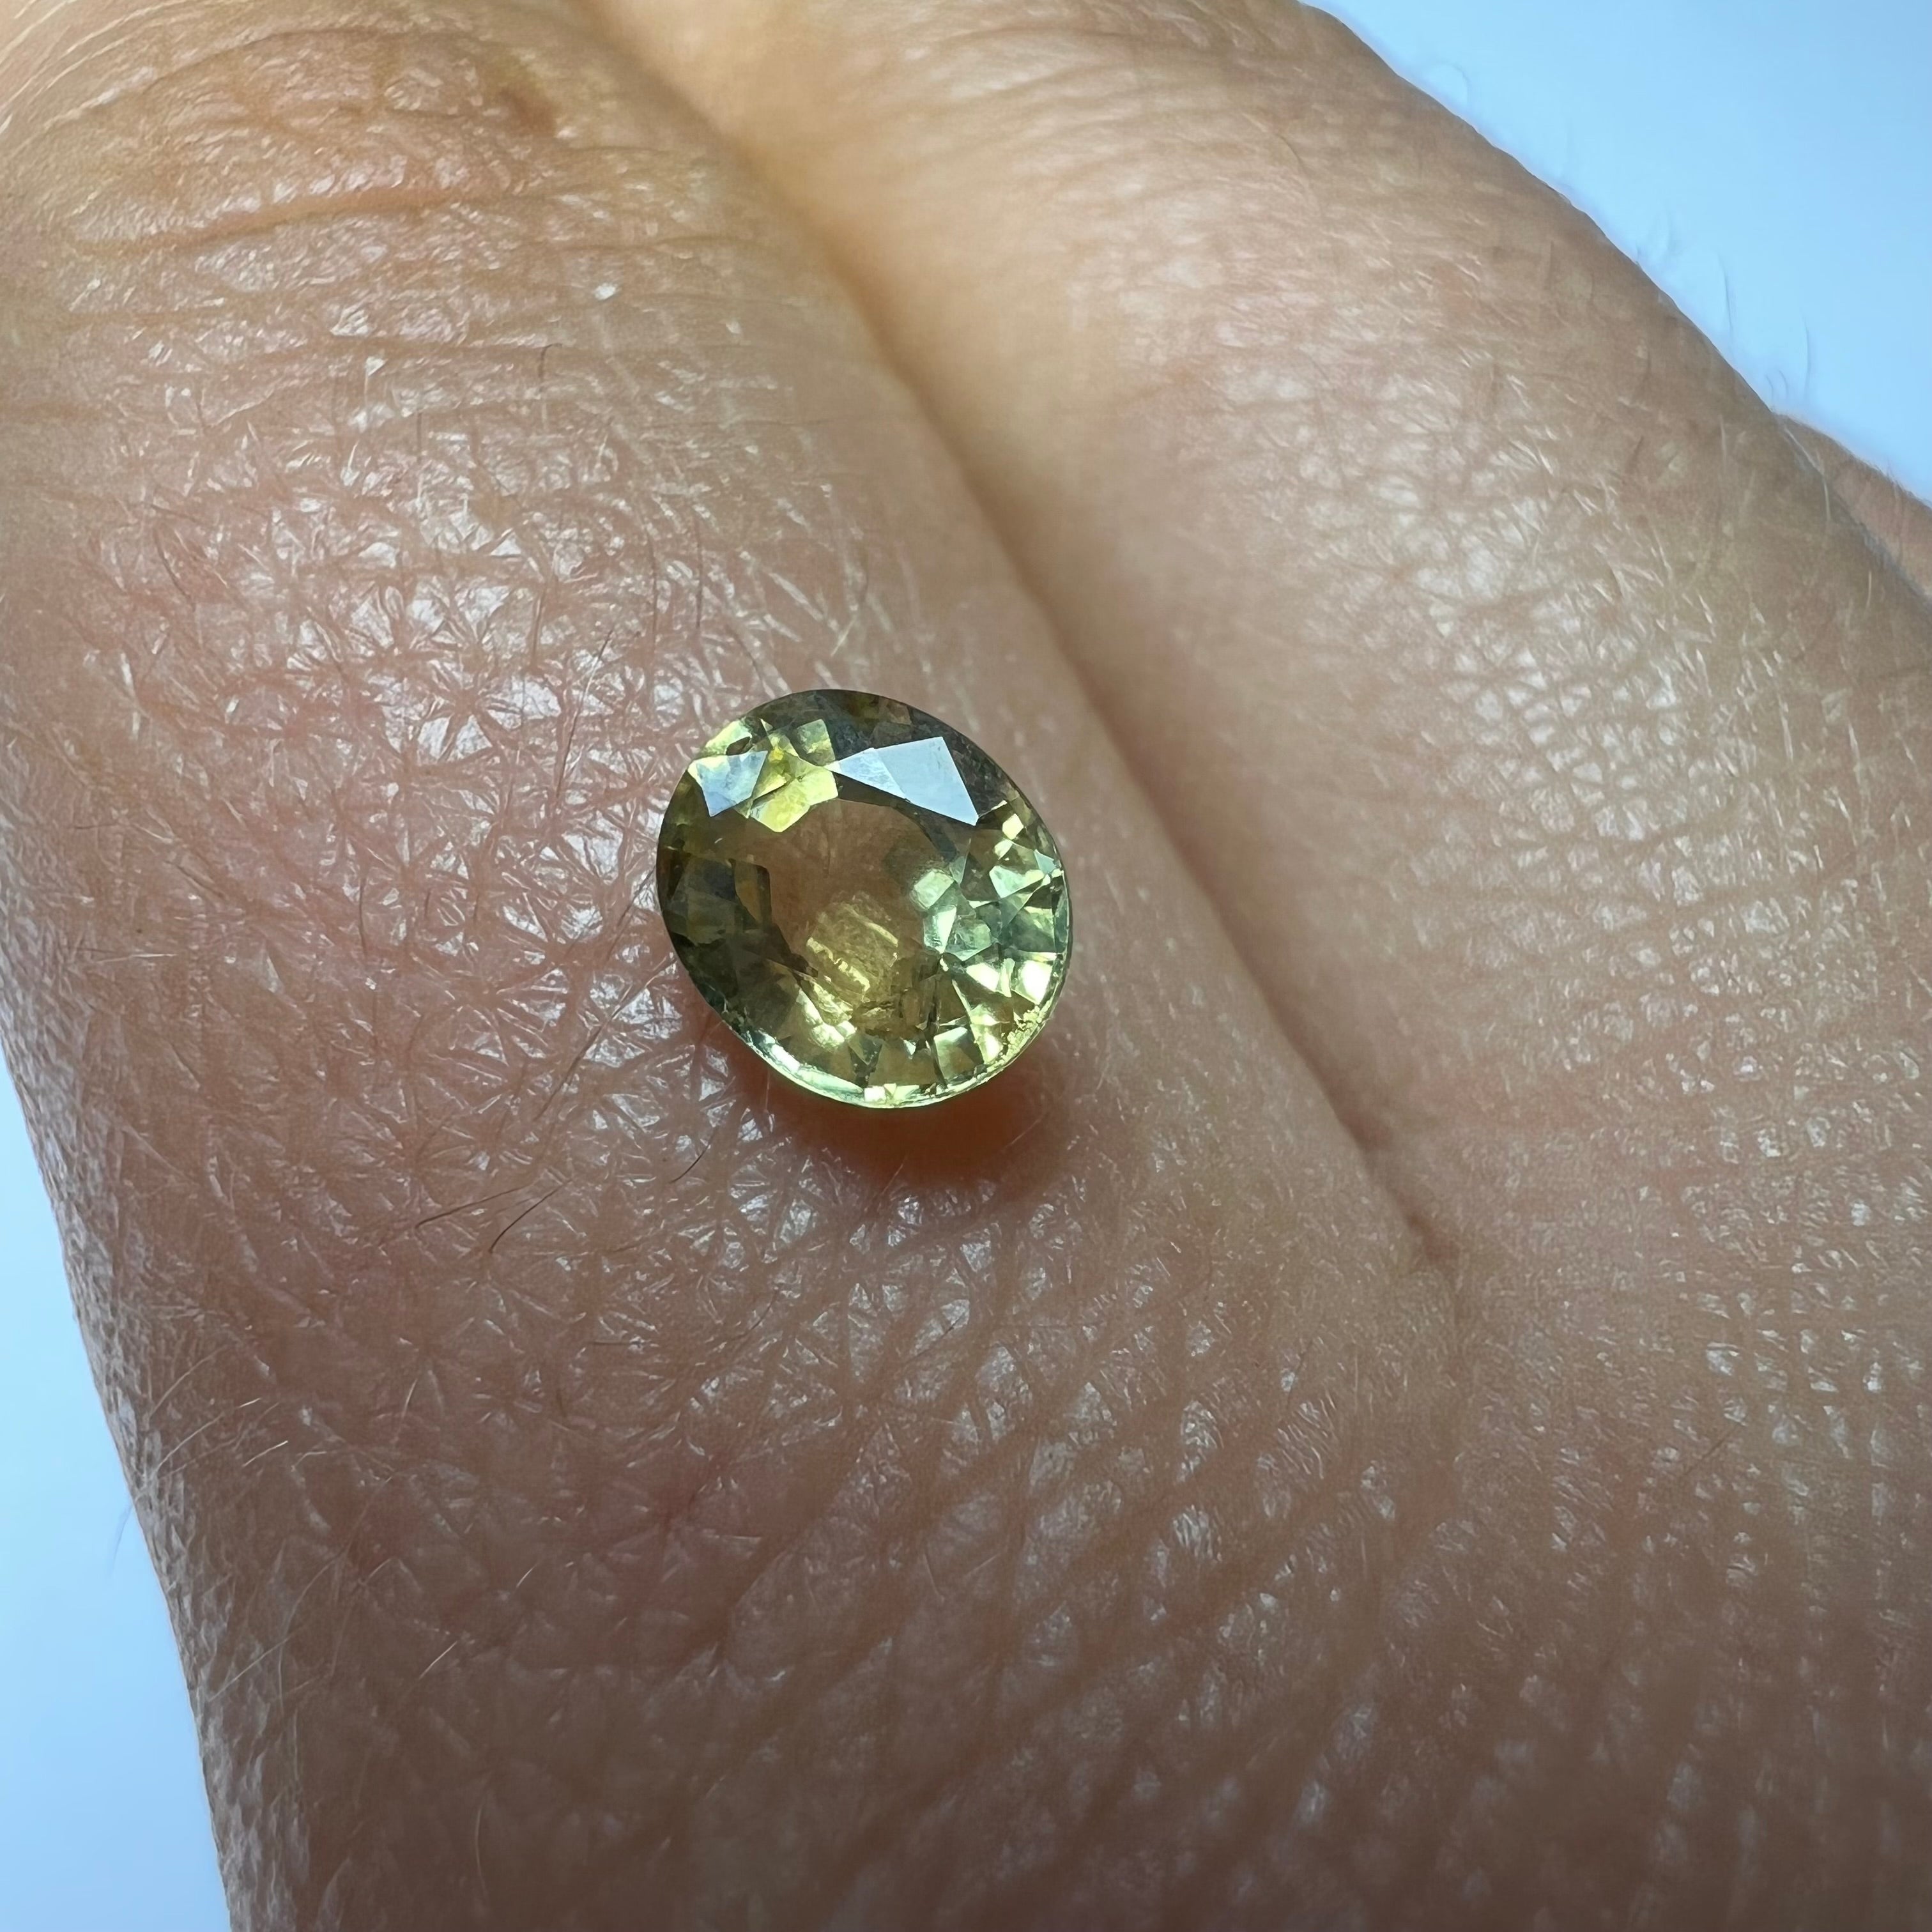 .89CTW Loose Light Yellow Oval Sapphire 6.10x5.15x3.15mm Earth mined Gemstone